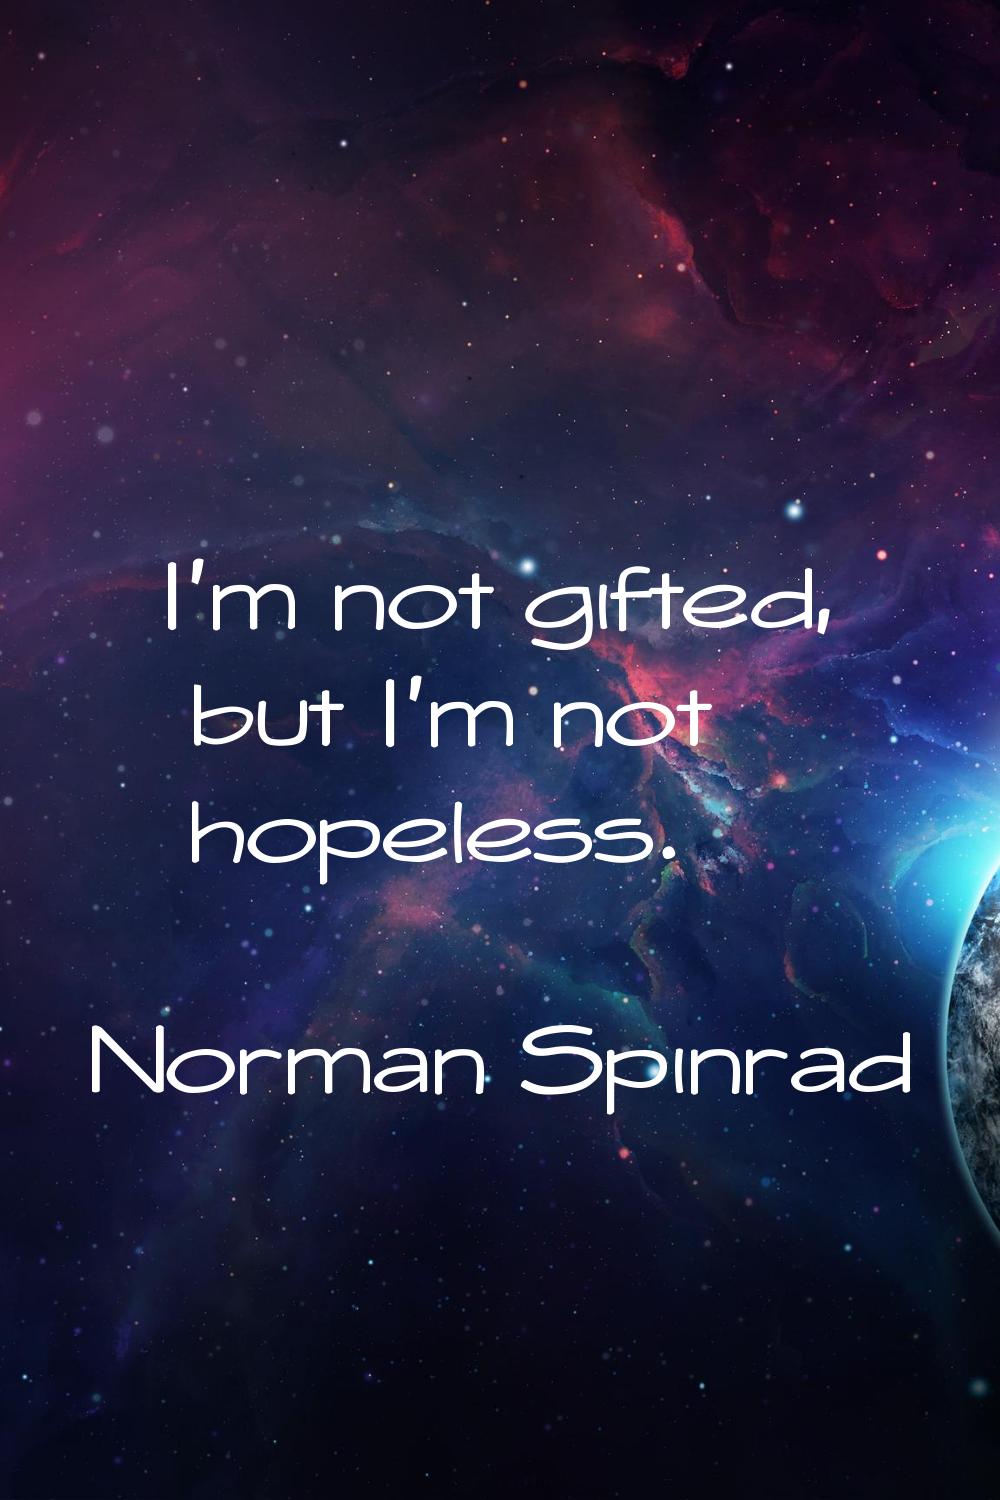 I'm not gifted, but I'm not hopeless.